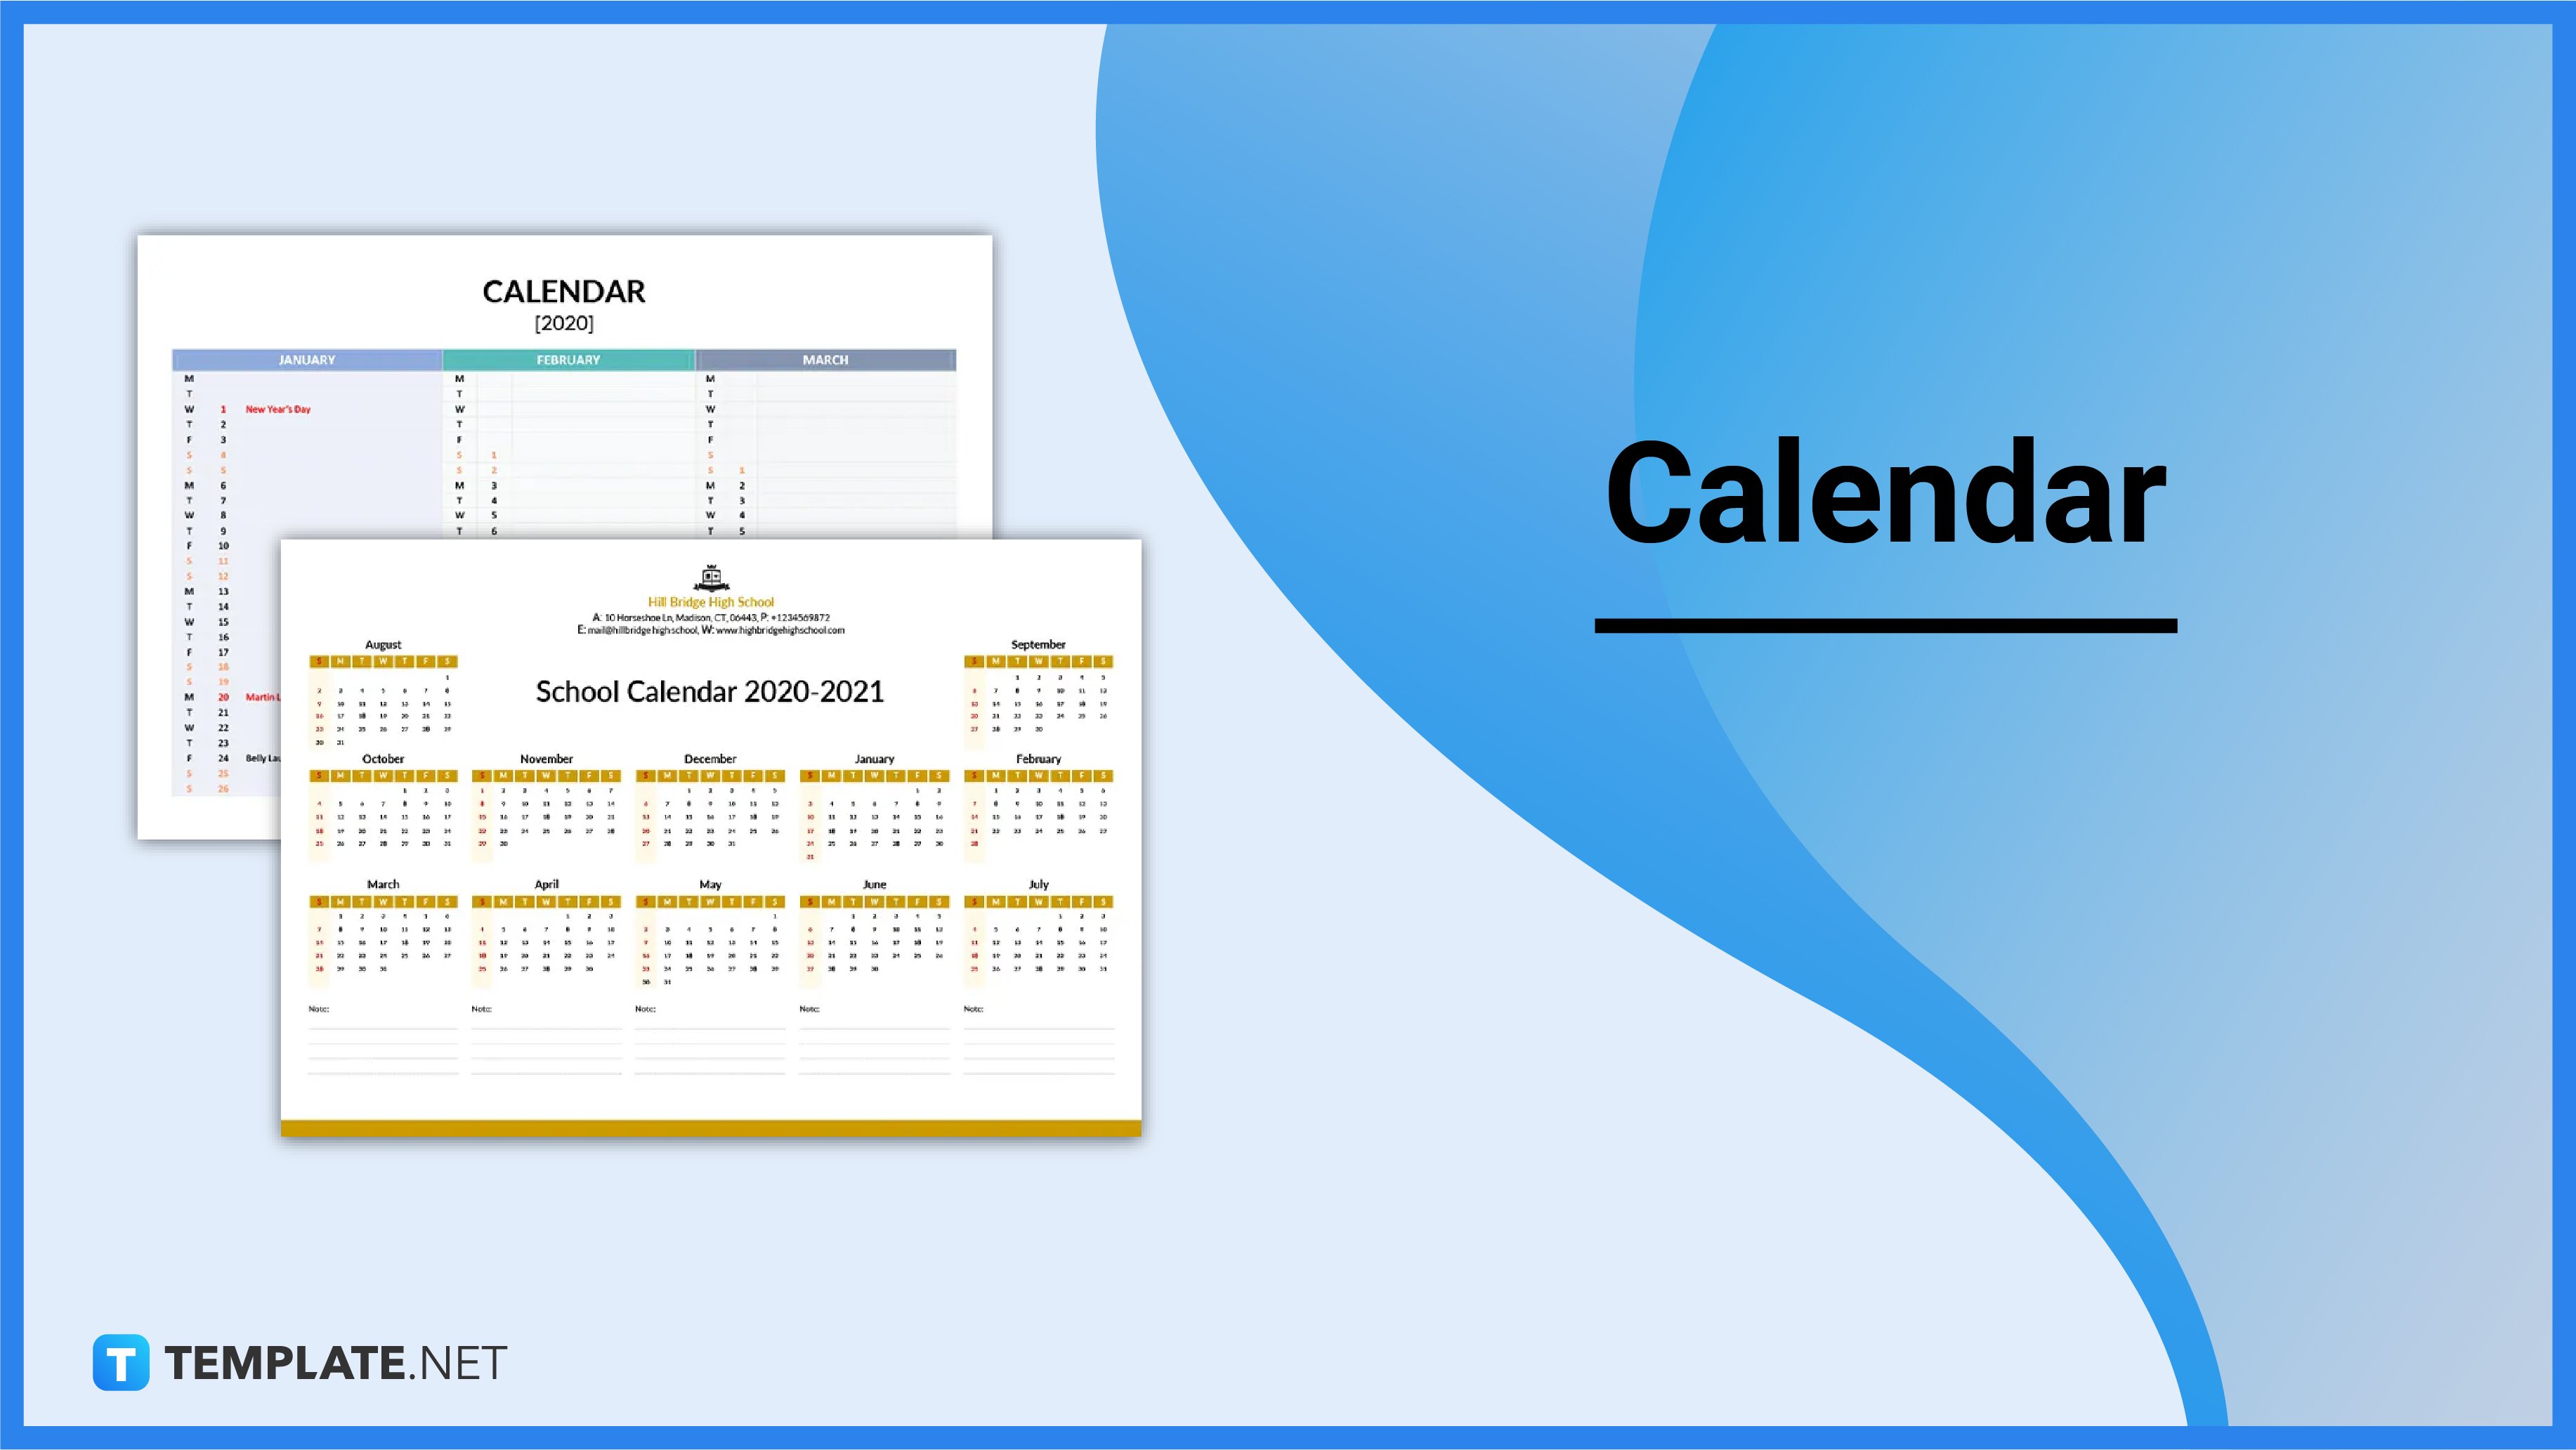 Calendar What Is a Calendar? Definition, Types, Uses